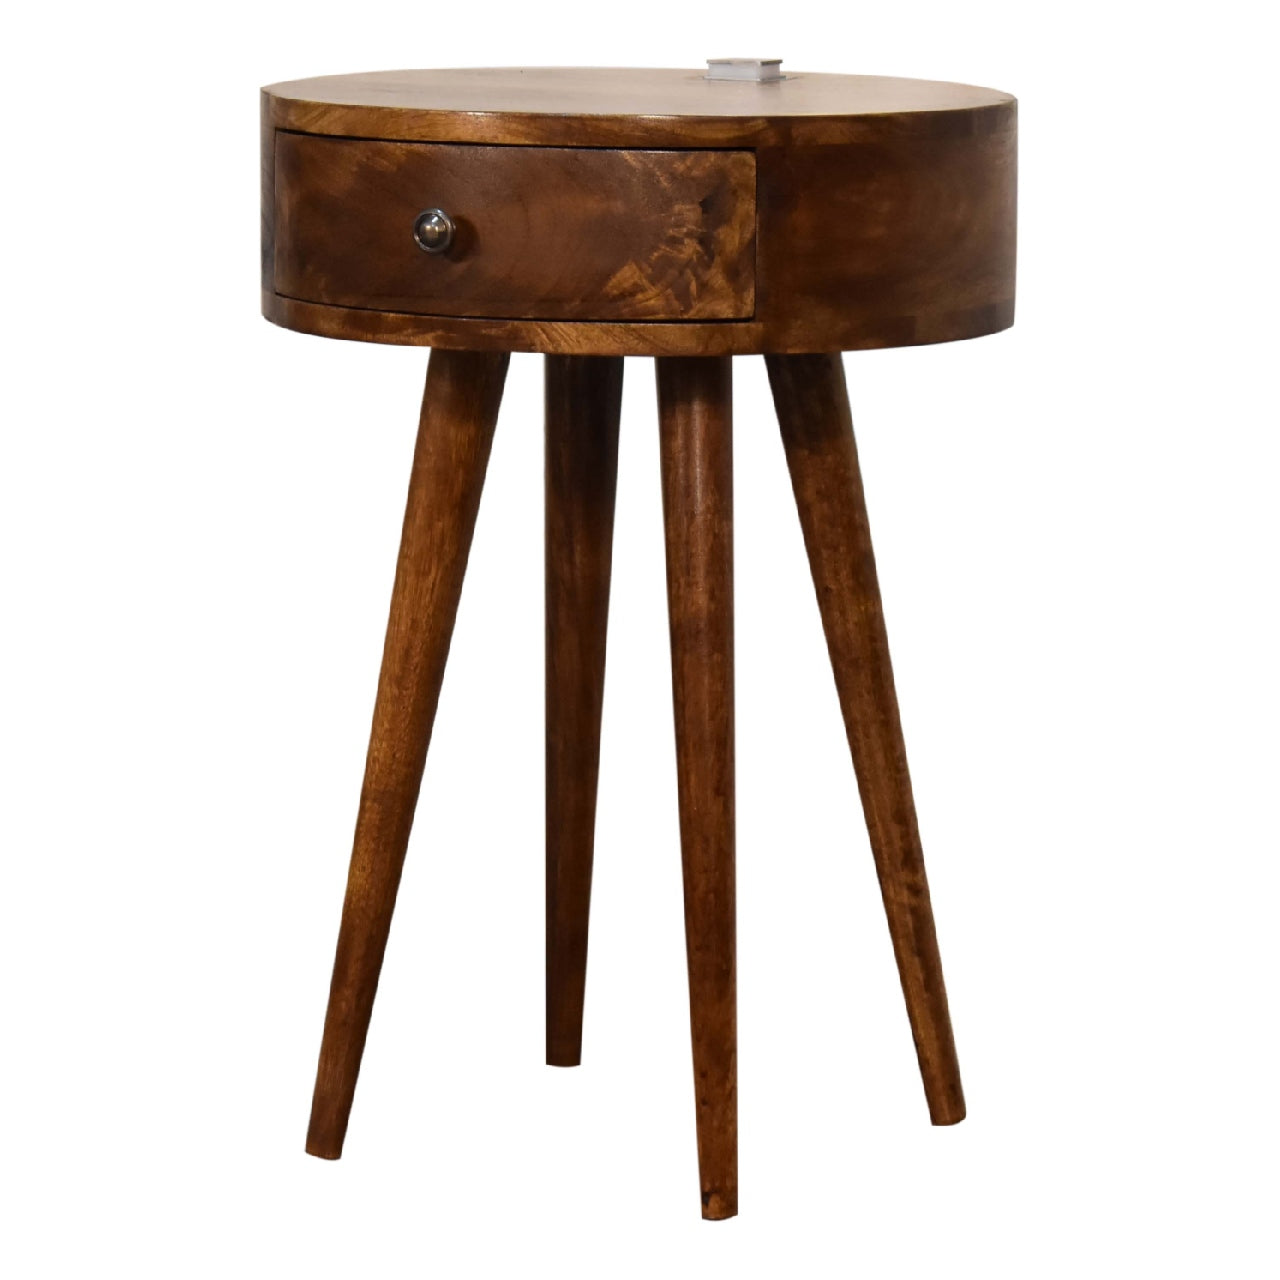 Single Drawer Chestnut Rounded Bedside Table with Reading Light - CasaFenix